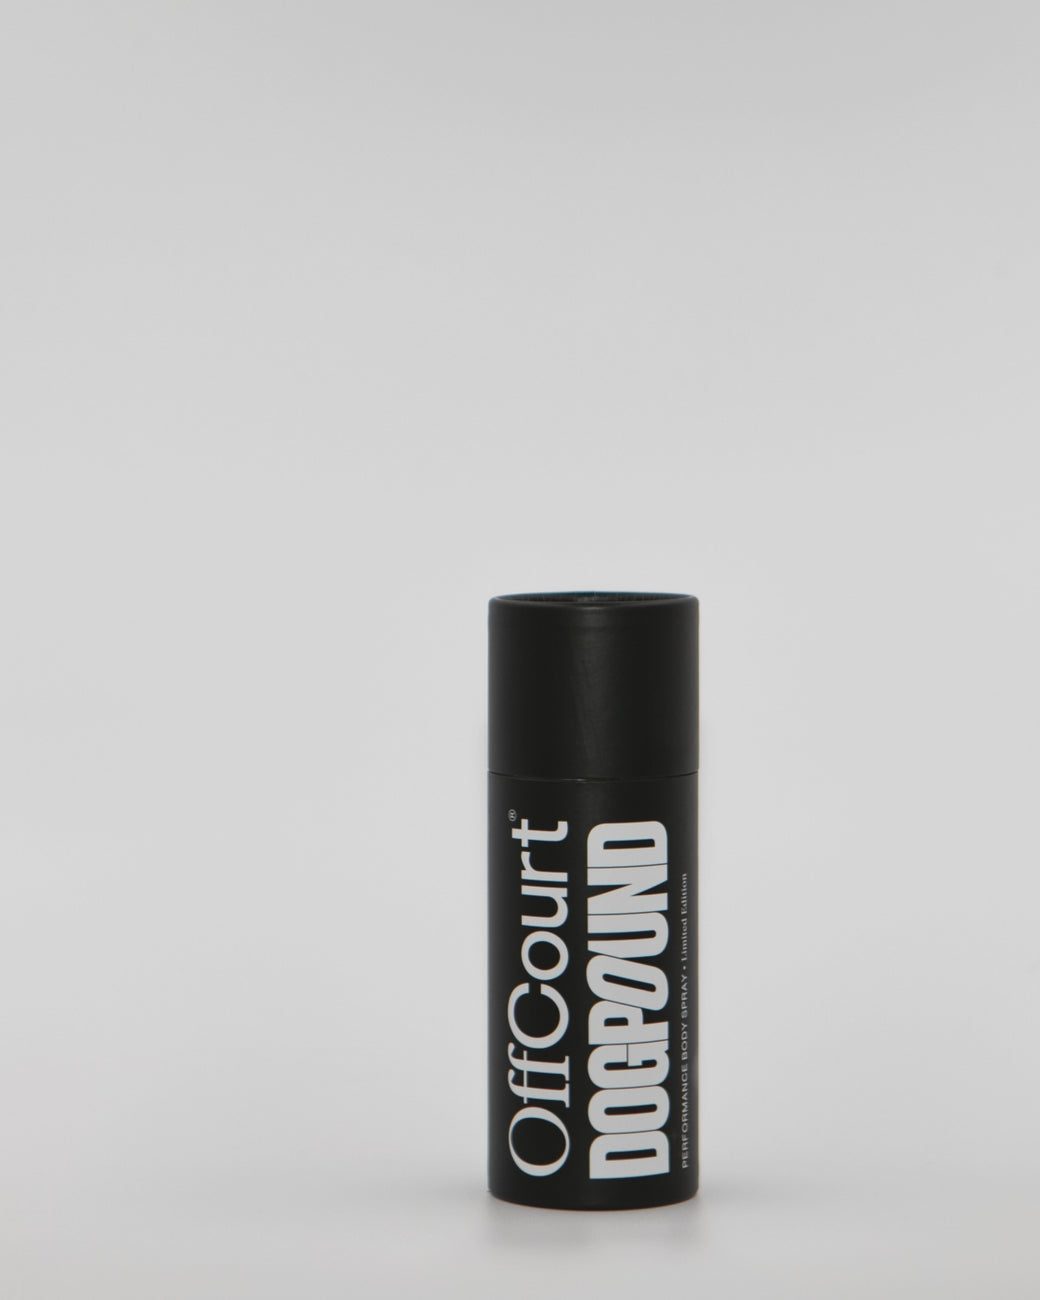 a can of dogpound body spray coming out of its outer packaging